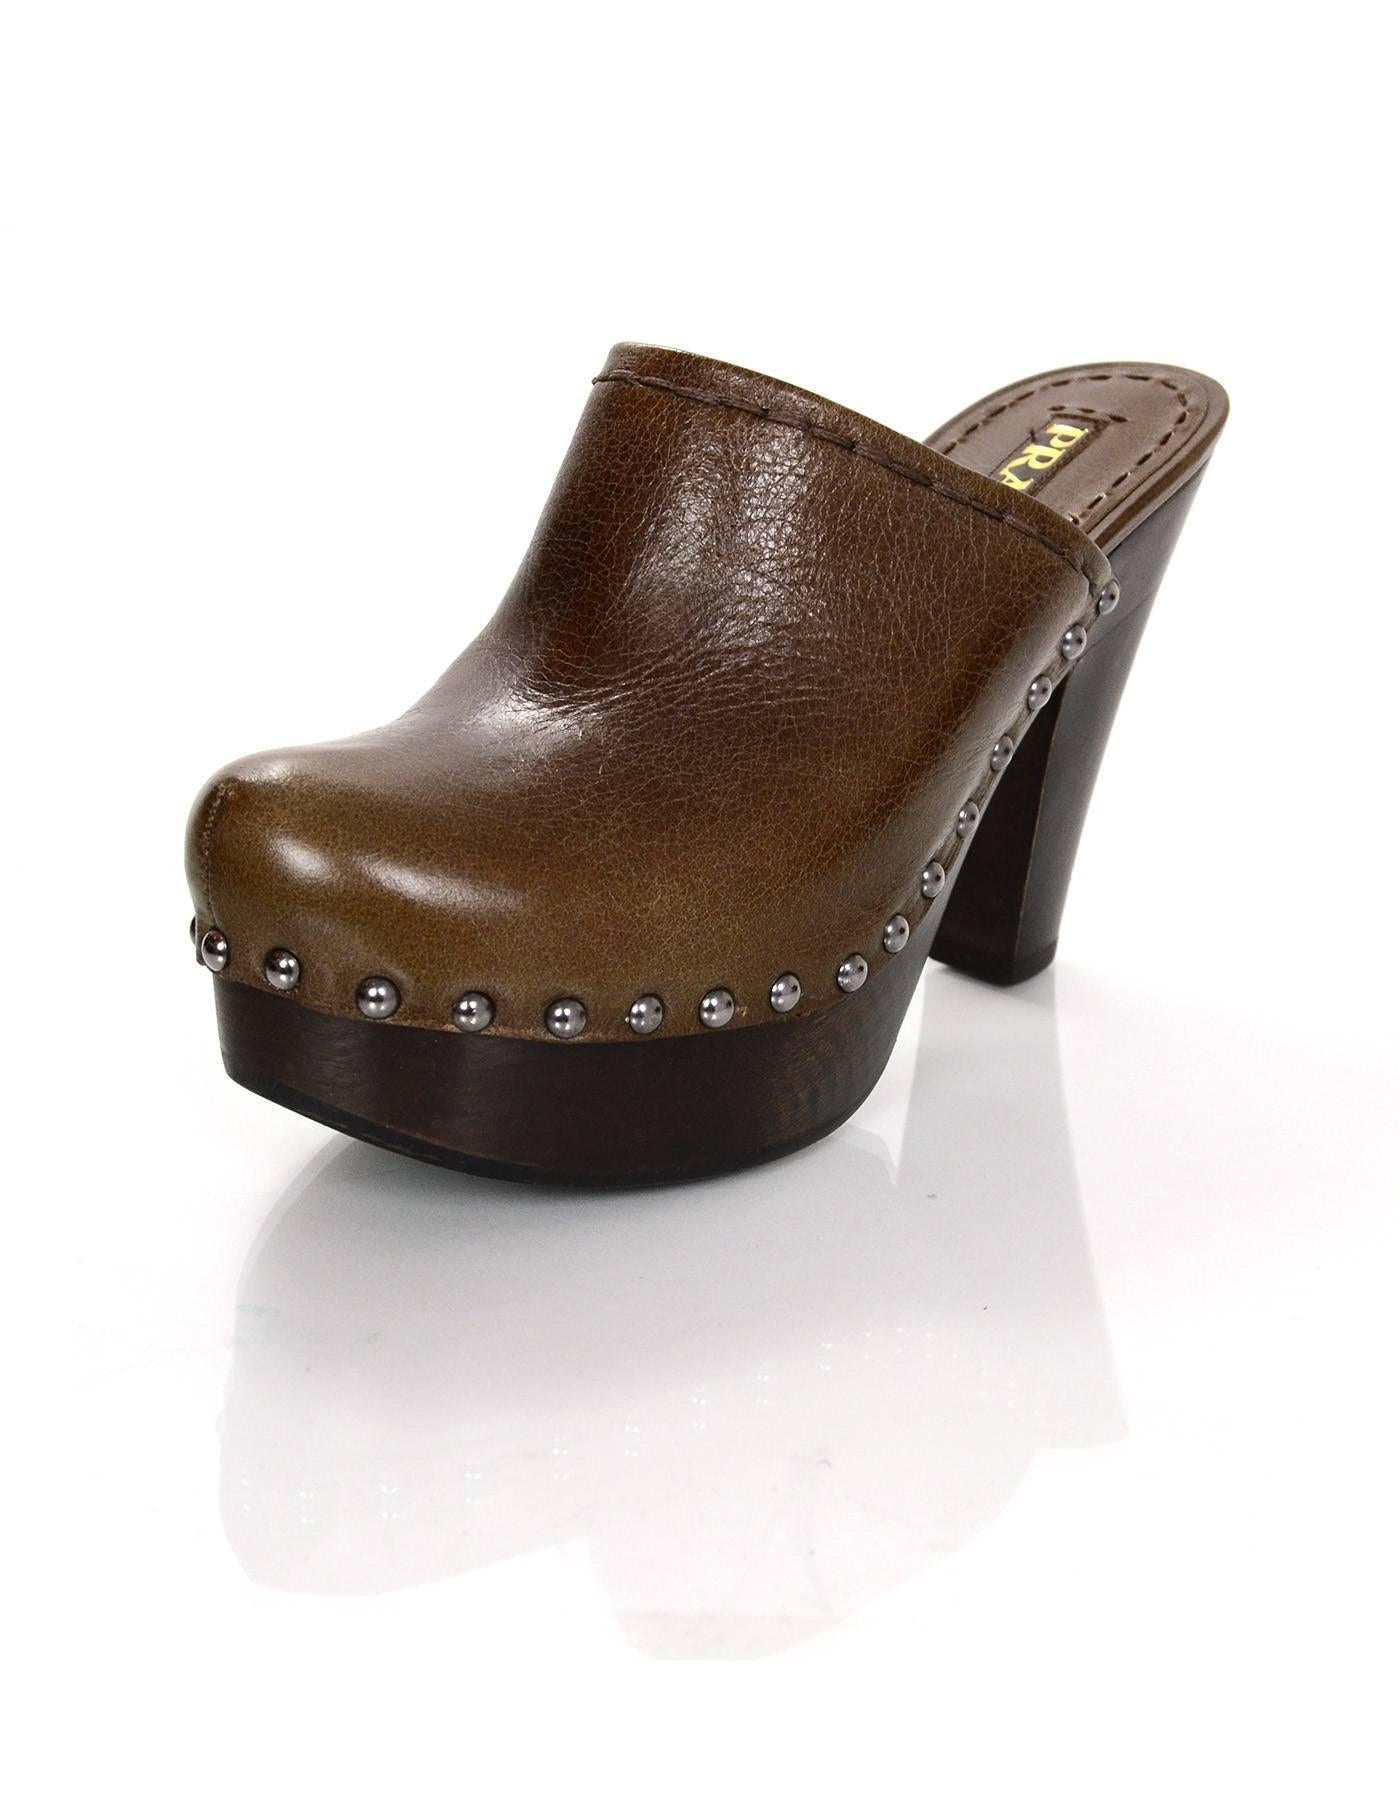 Prada Brown Leather Clogs Sz 36.5

Made In: Italy
Color: Brown
Materials: Leather
Closure/opening: Slide on
Sole Stamp: Prada 36.5
Overall Condition: Excellent pre-owned condition with the exception of light wear at insoles and out soles
Included: